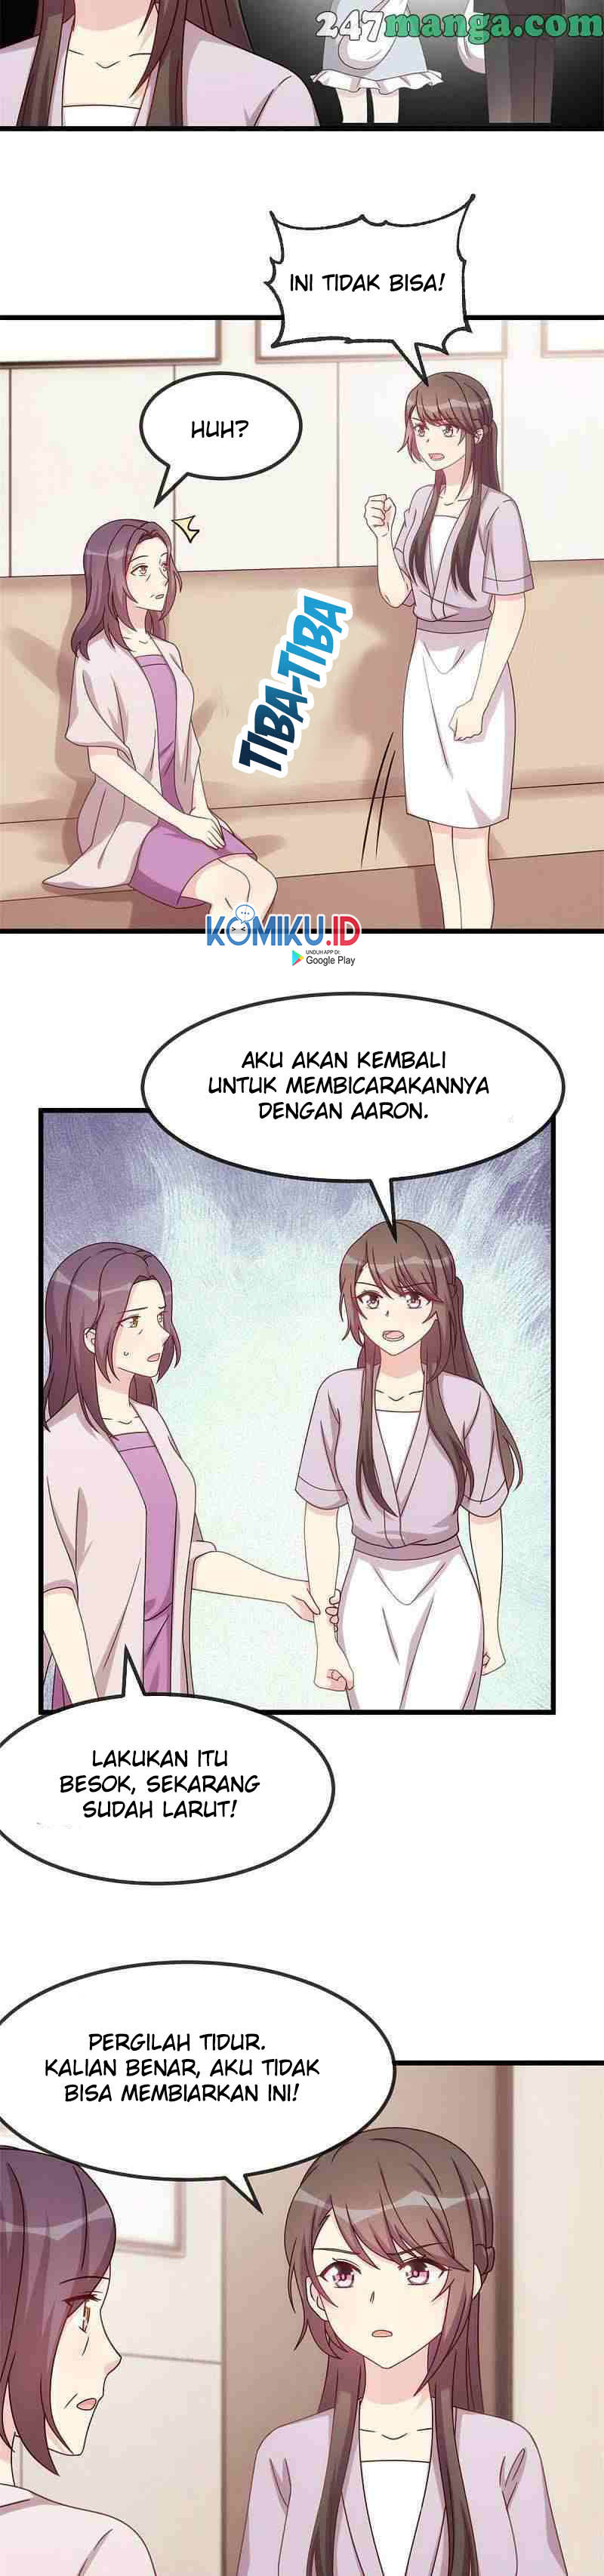 CEO’s Sudden Proposal Chapter 338 7